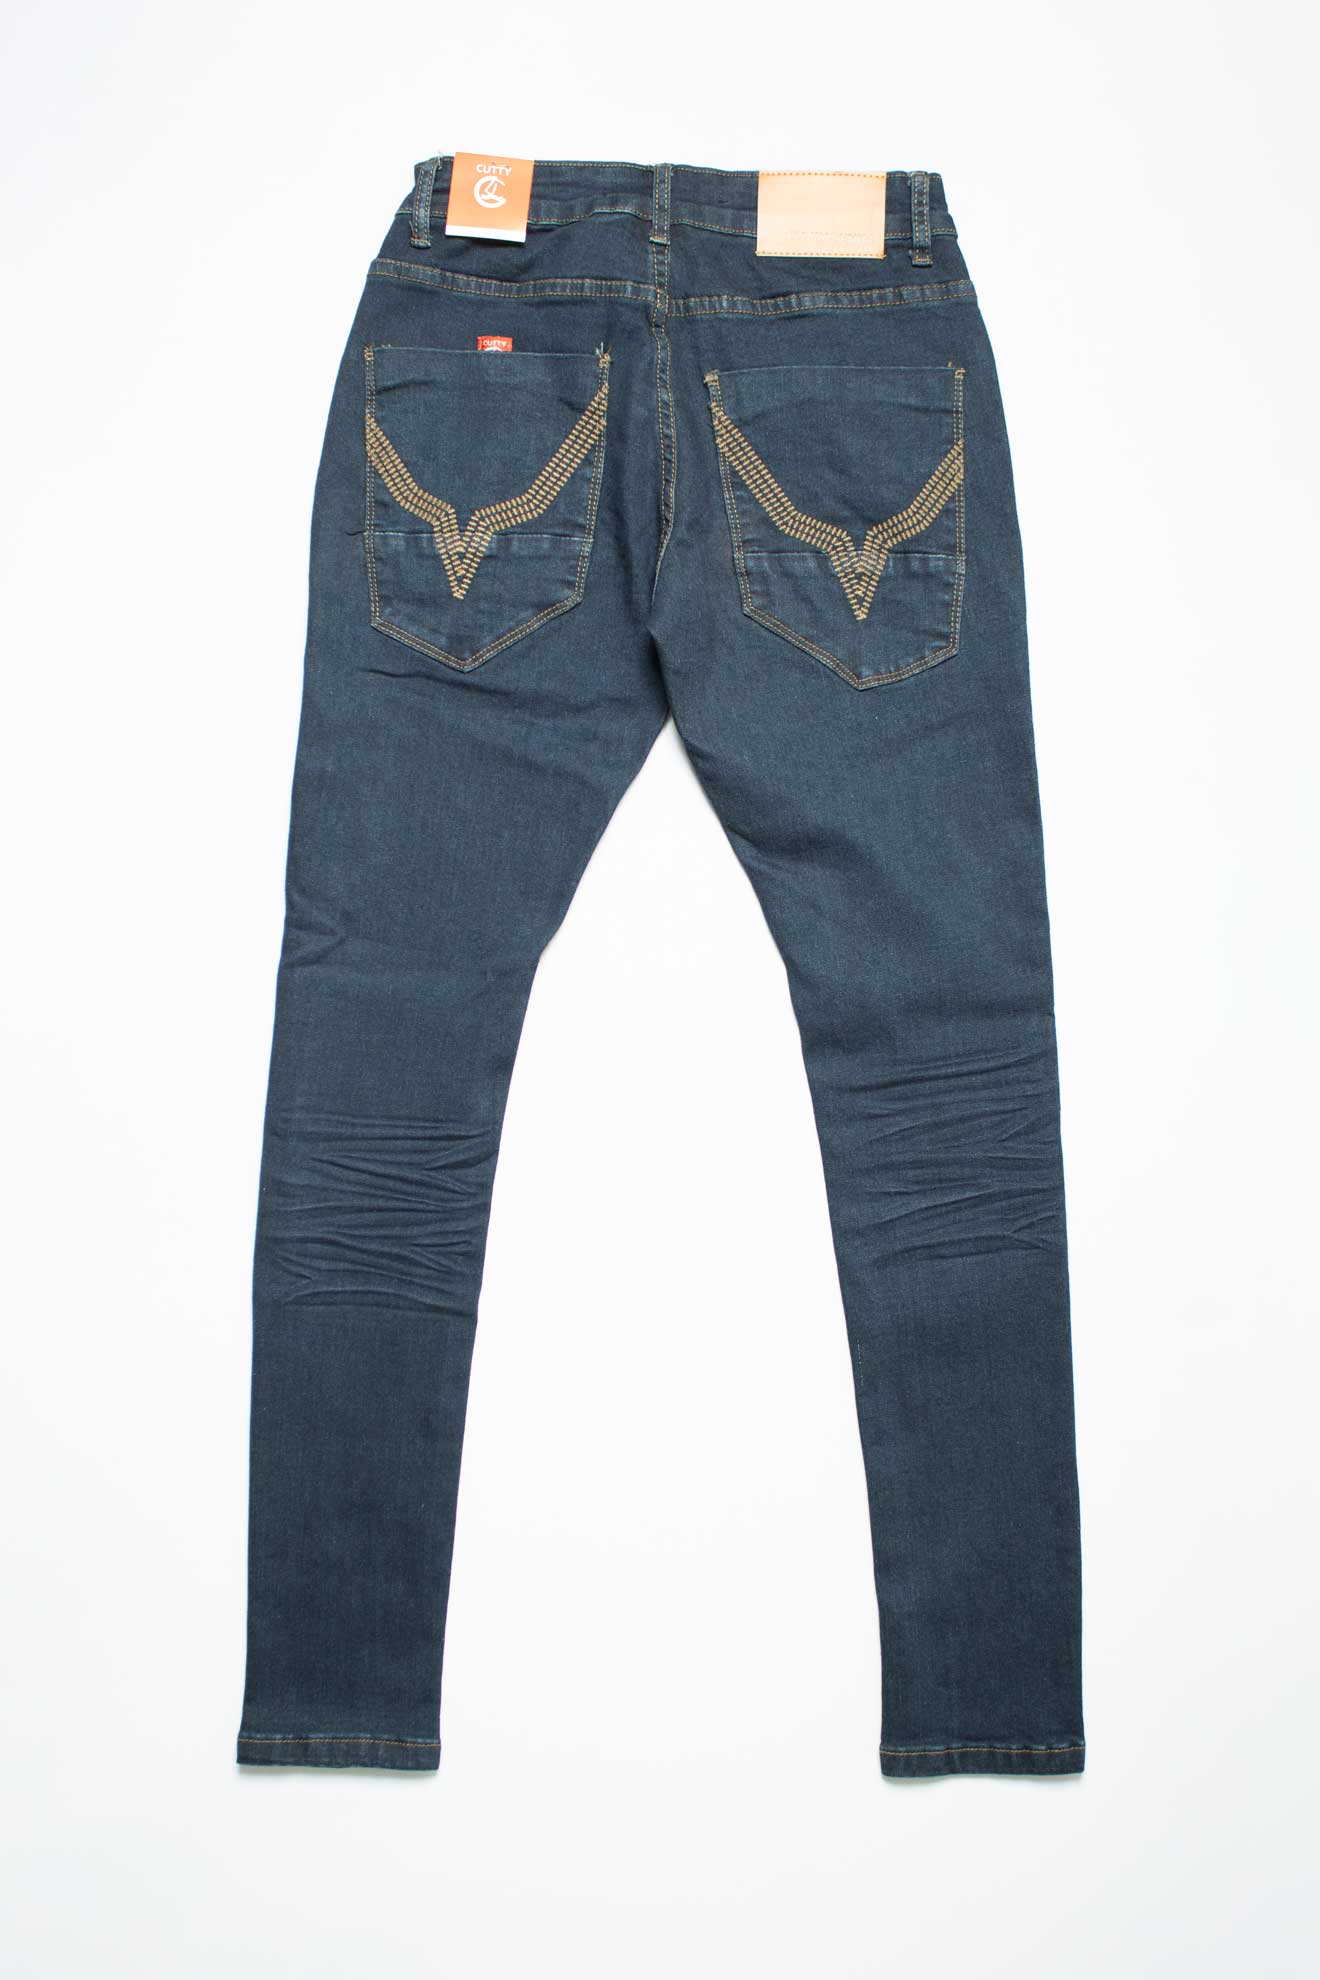 How Much Are Redbat Jeans In South Africa?